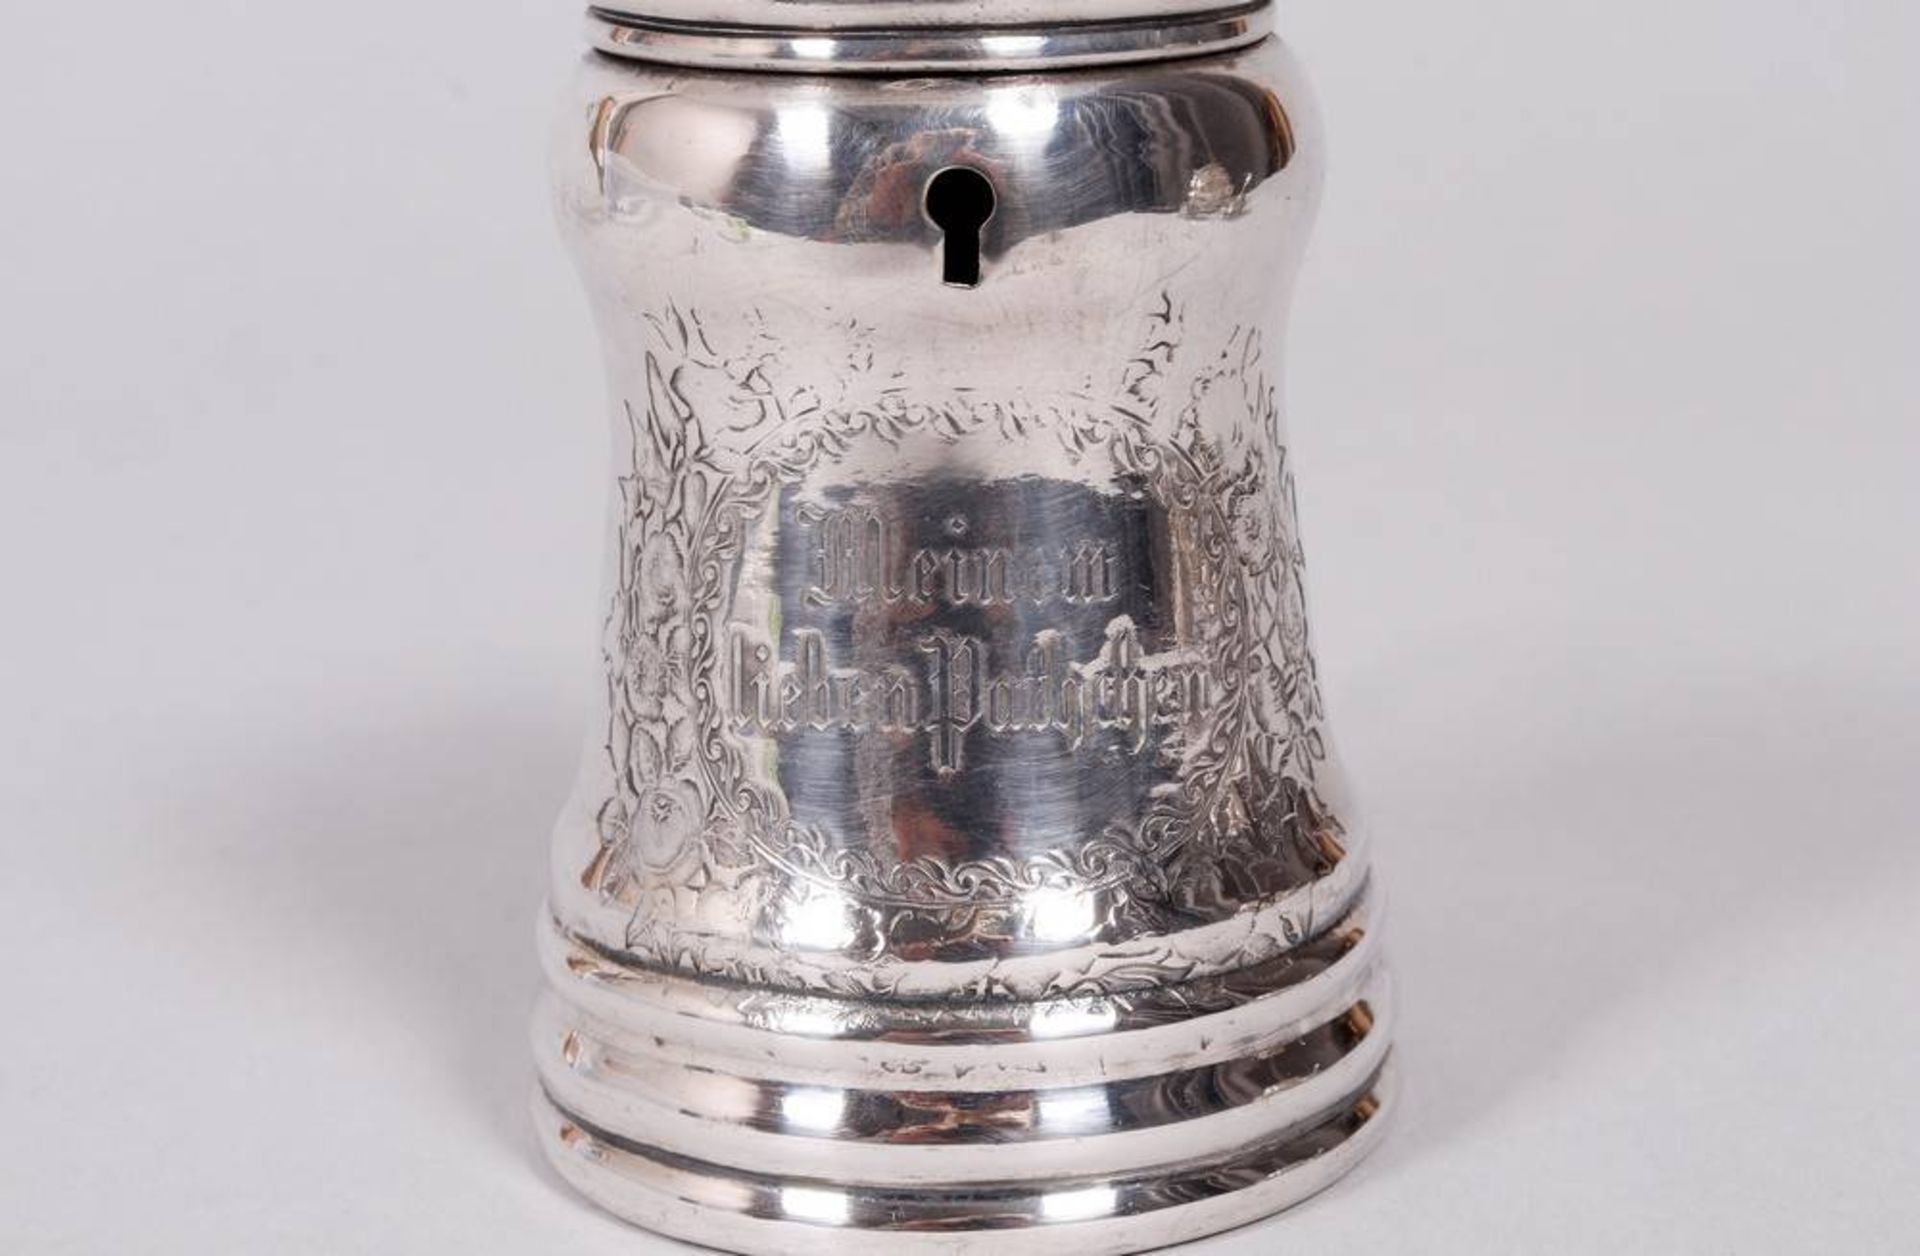 Small money box, silver, probably German, late 19th C. - Image 2 of 4